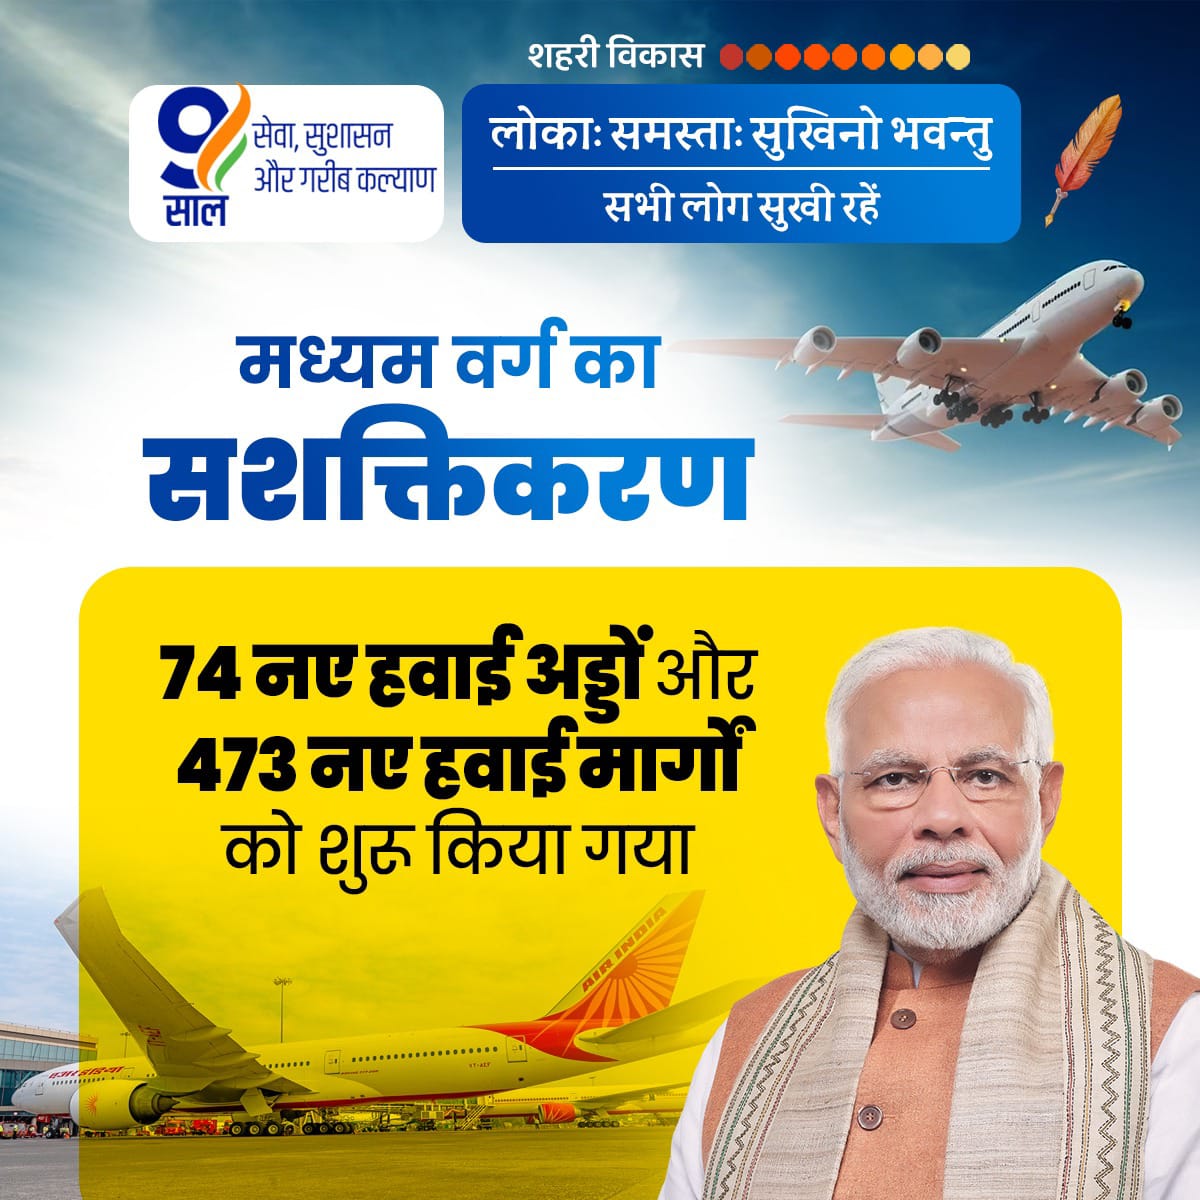 Connecting India like never before. Sri @narendramodi ji Govt has made remarkable progress in air connectivity, building 74 new airports during #9YearsOfSeva & commissioning 473 new air routes. #ShahariVikasKe9Saal